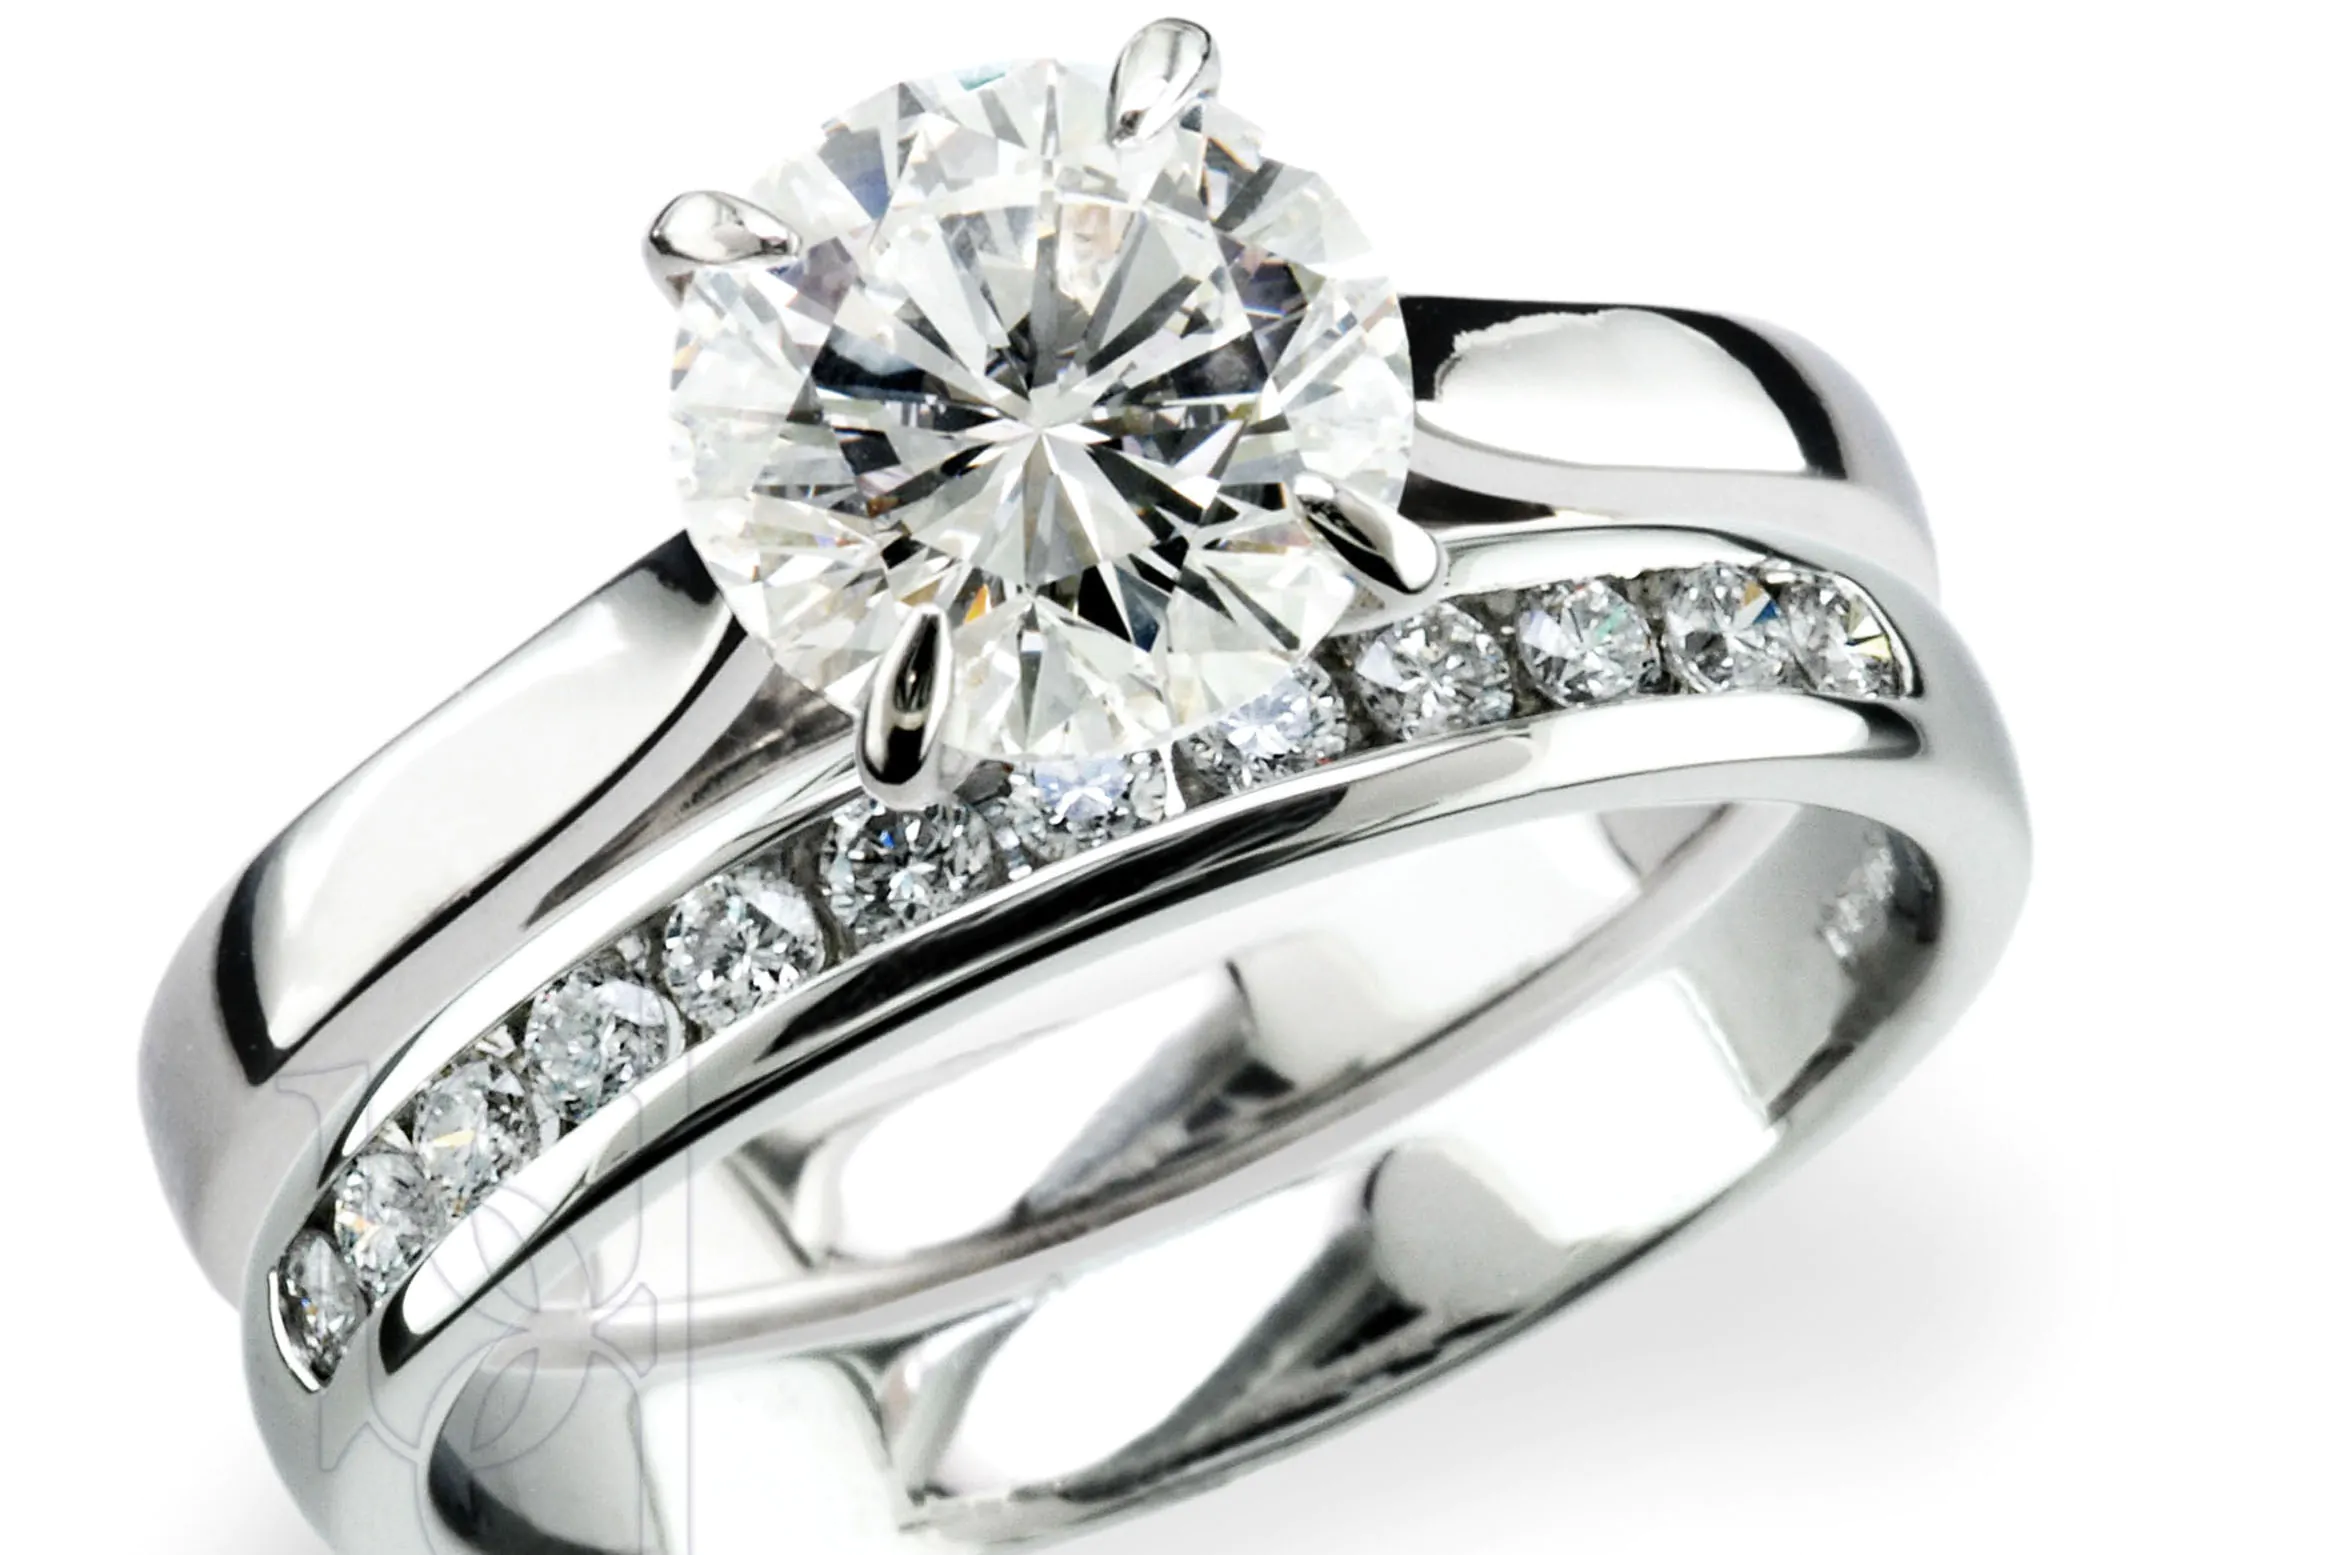 How to choose the perfect engagement ring